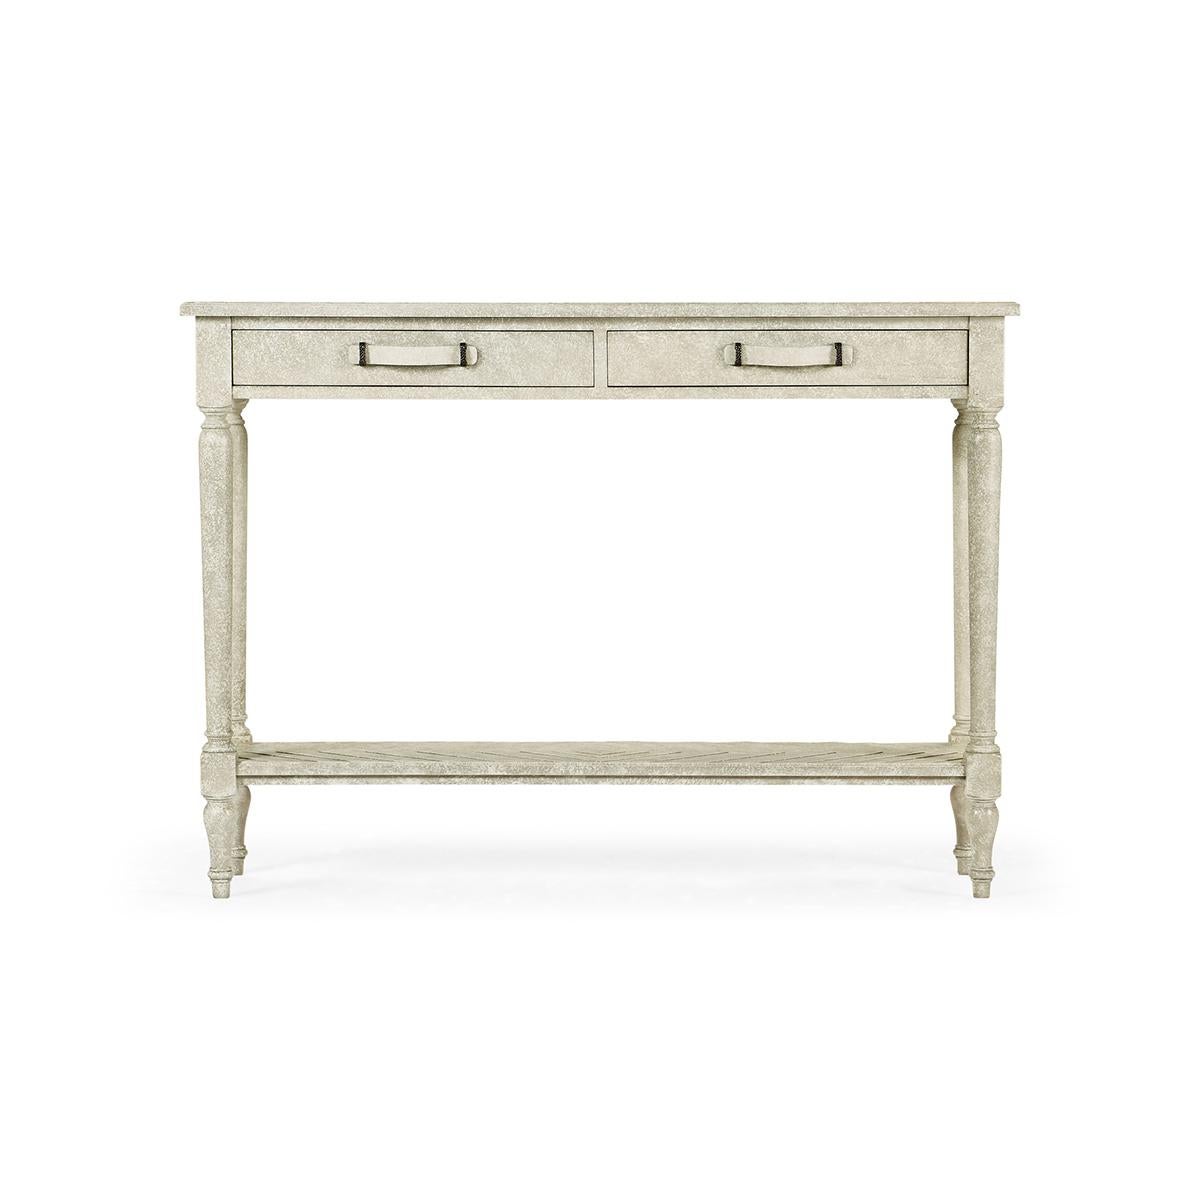 French Provincial Console table, with a heavily distressed whitewash drift finish, this parquet top console has two drawers and under-tier. Bentwood and iron handles contrasting dark geometric inlay to panels. Raised on turned and tapered